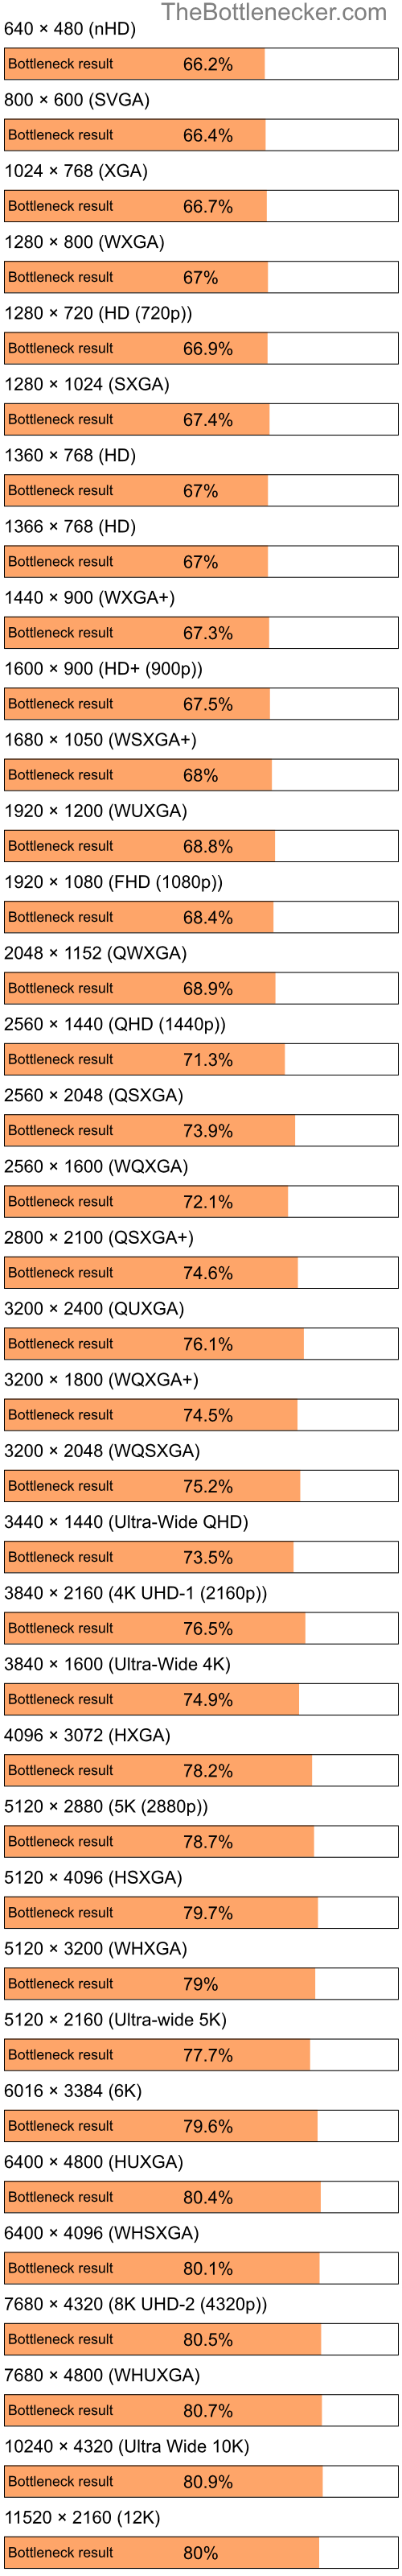 Bottleneck results by resolution for Intel Pentium 4 and AMD Mobility Radeon 9600 in Processor Intense Tasks